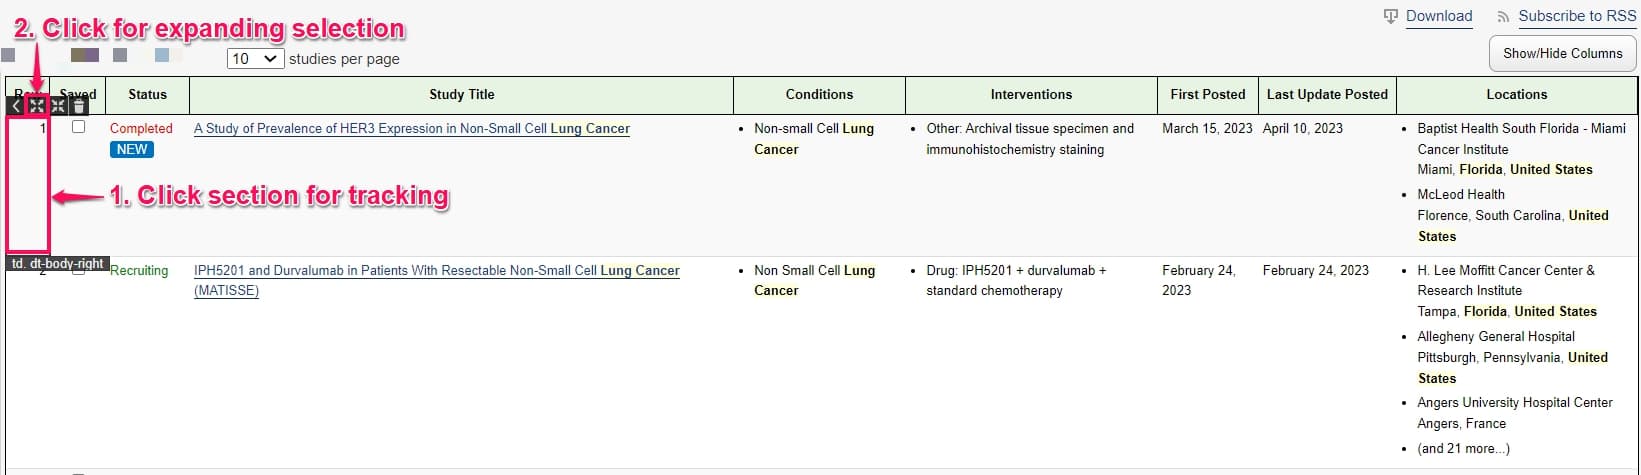 Select section of clinical trial feed for tracking